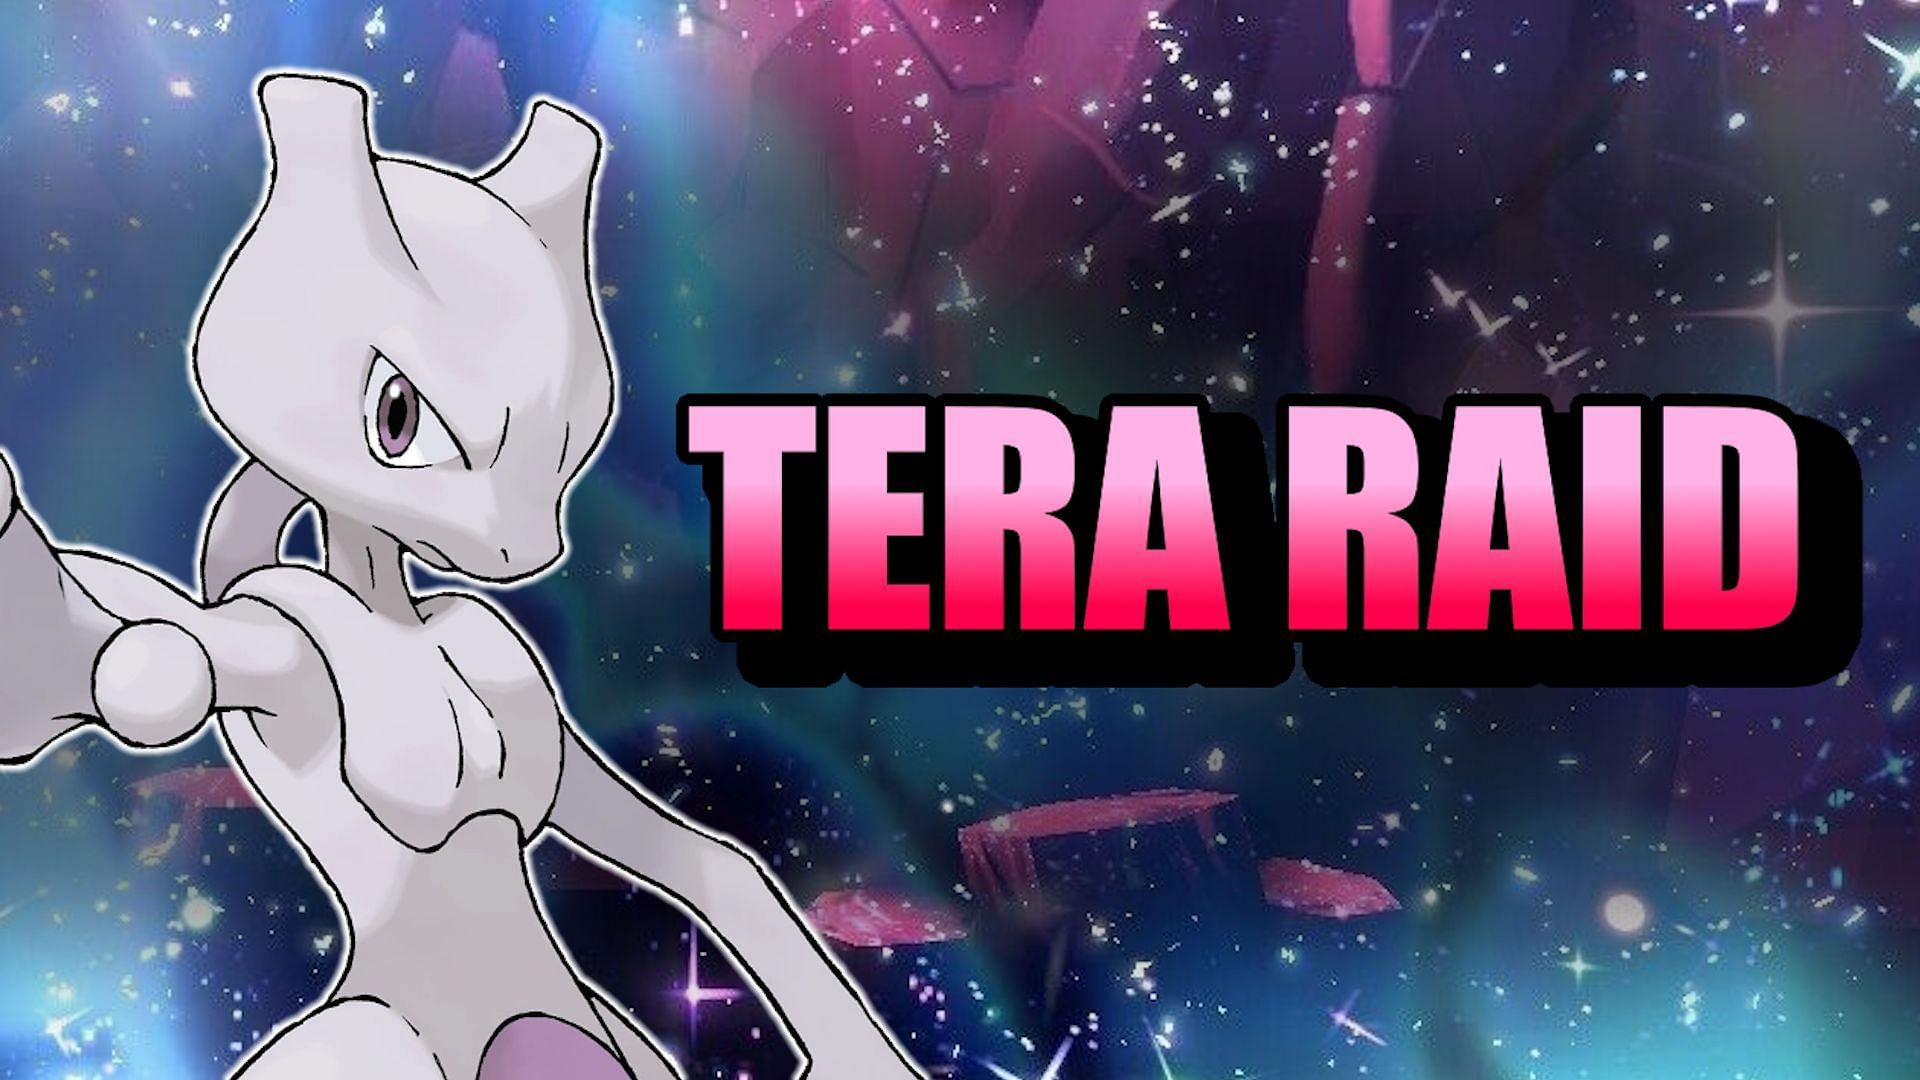 🌟 Mewtwo 7 Star Tera Raid Counters featuring Mew! 🌟 Check out the f